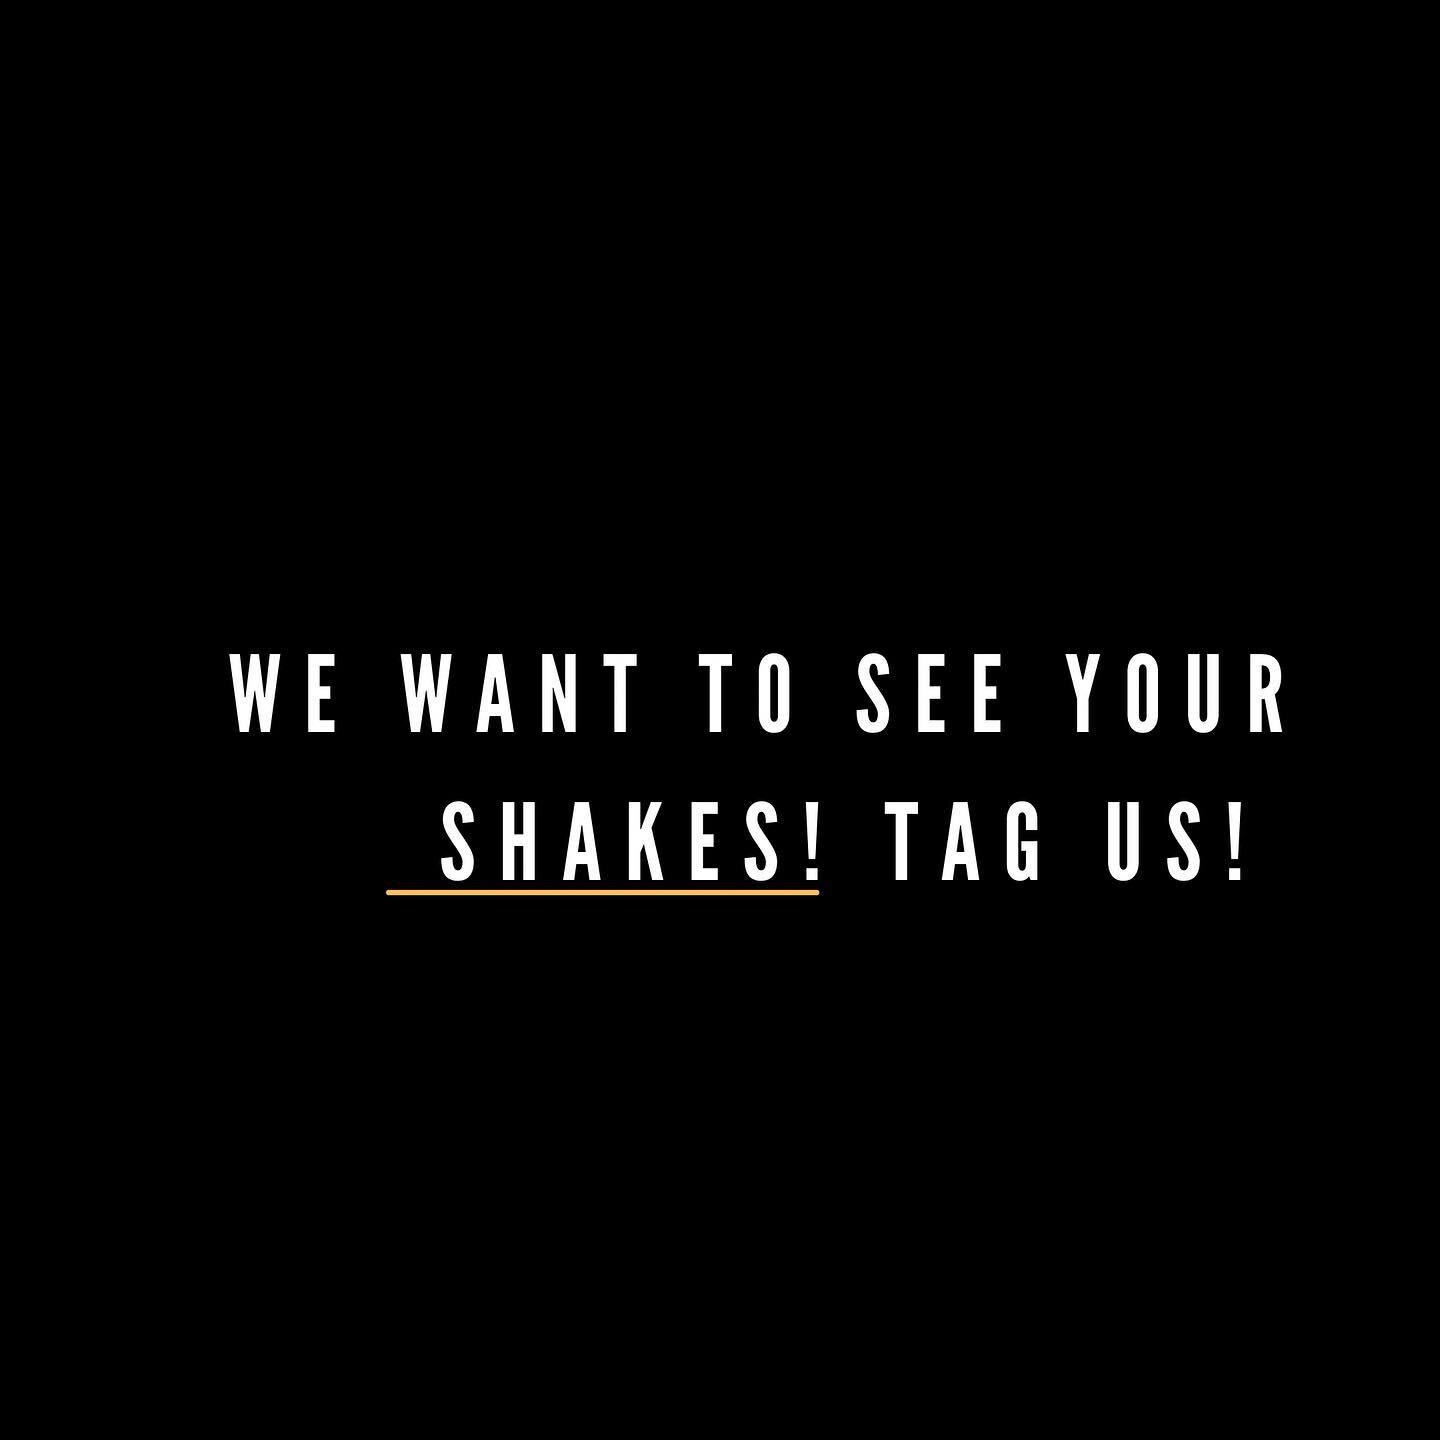 We want to see your shakes! Tag us so we can cheer you on!